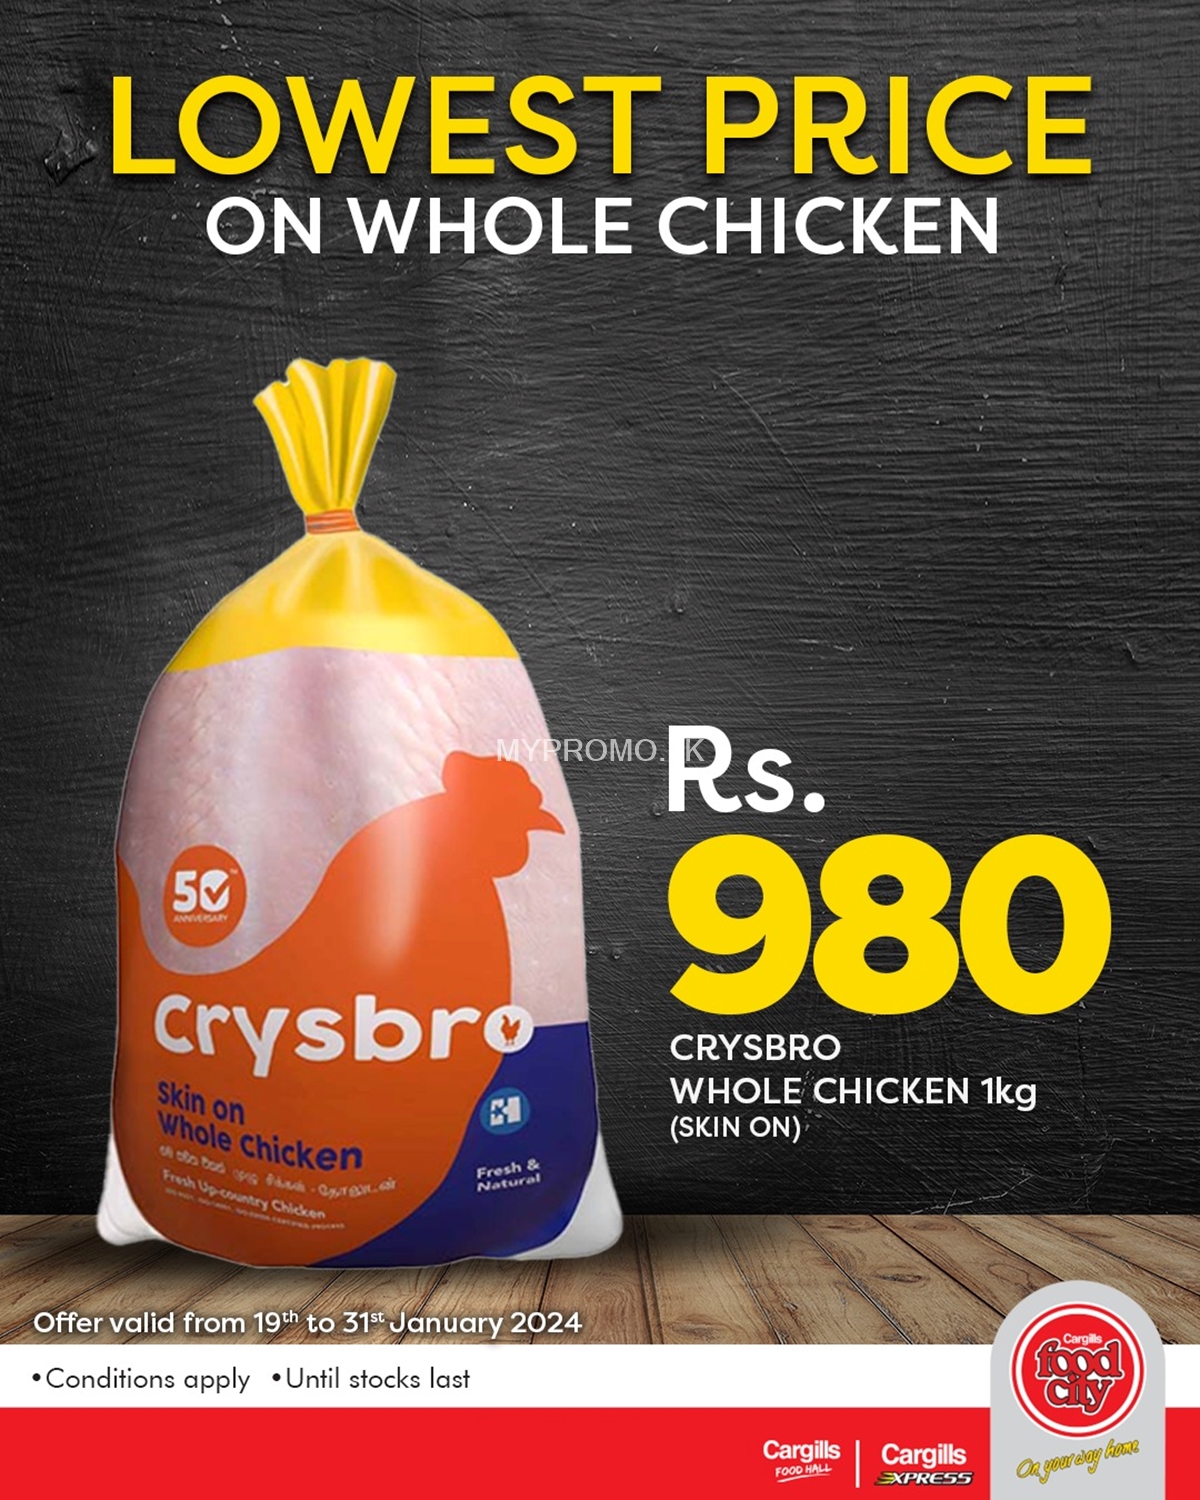 Enjoy the lowest price on Whole Chicken at just Rs.980 at Cargills Food City